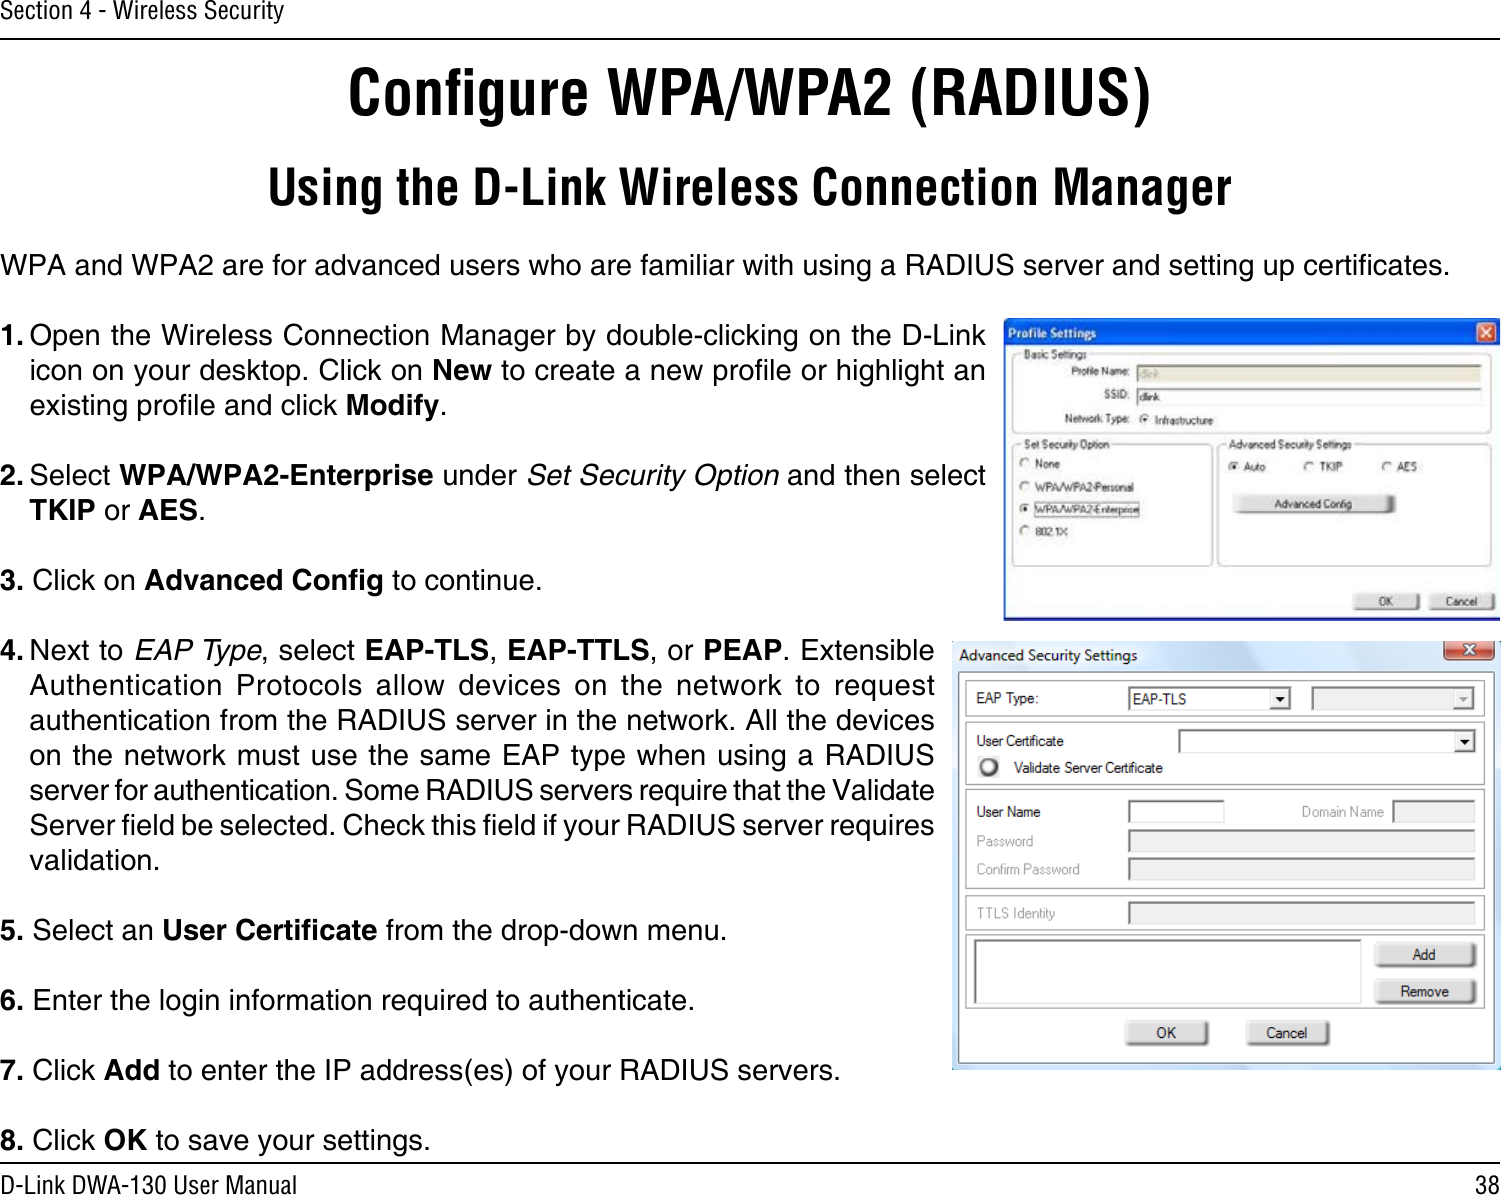 38D-Link DWA-130 User ManualSection 4 - Wireless SecurityConﬁgure WPA/WPA2 (RADIUS)Using the D-Link Wireless Connection ManagerWPA and WPA2 are for advanced users who are familiar with using a RADIUS server and setting up certicates.1. Open the Wireless Connection Manager by double-clicking on the D-Link icon on your desktop. Click on New to create a new prole or highlight an existing prole and click Modify. 2. Select WPA/WPA2-Enterprise under Set Security Option and then select TKIP or AES.3. Click on Advanced Cong to continue.4. Next to EAP Type, select EAP-TLS, EAP-TTLS, or PEAP. Extensible Authentication  Protocols  allow  devices  on  the  network  to  request authentication from the RADIUS server in the network. All the devices on the network must use the same EAP type when using a RADIUS server for authentication. Some RADIUS servers require that the Validate Server eld be selected. Check this eld if your RADIUS server requires validation.5. Select an User Certicate from the drop-down menu.6. Enter the login information required to authenticate.7. Click Add to enter the IP address(es) of your RADIUS servers.8. Click OK to save your settings.